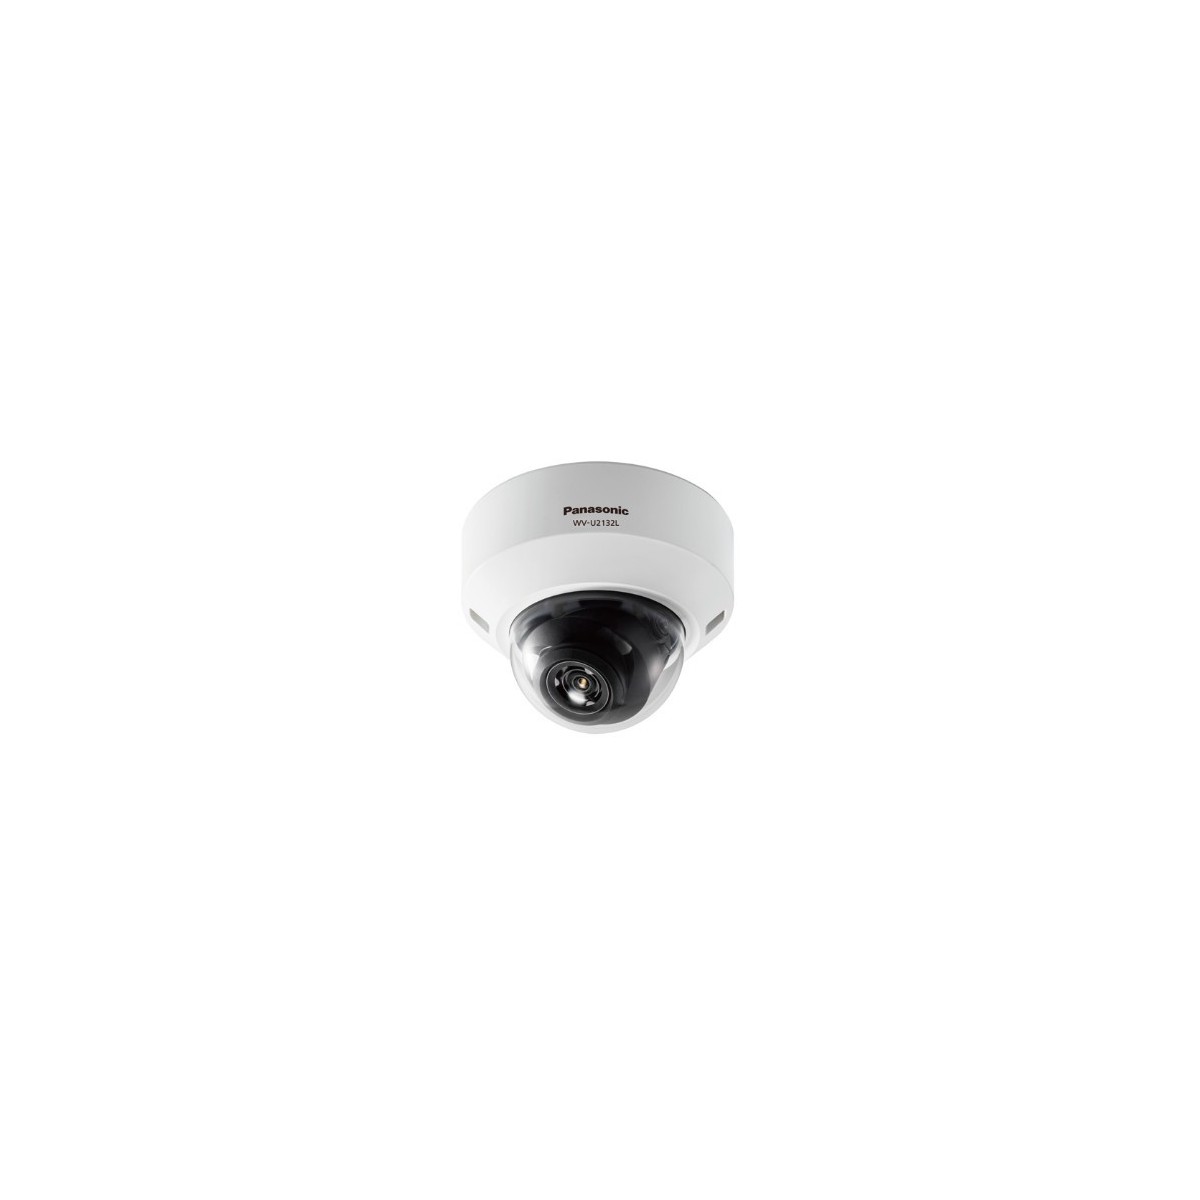 Panasonic WV-U2132L - IP security camera - Indoor - Wired - Dome - Ceiling - Black - White